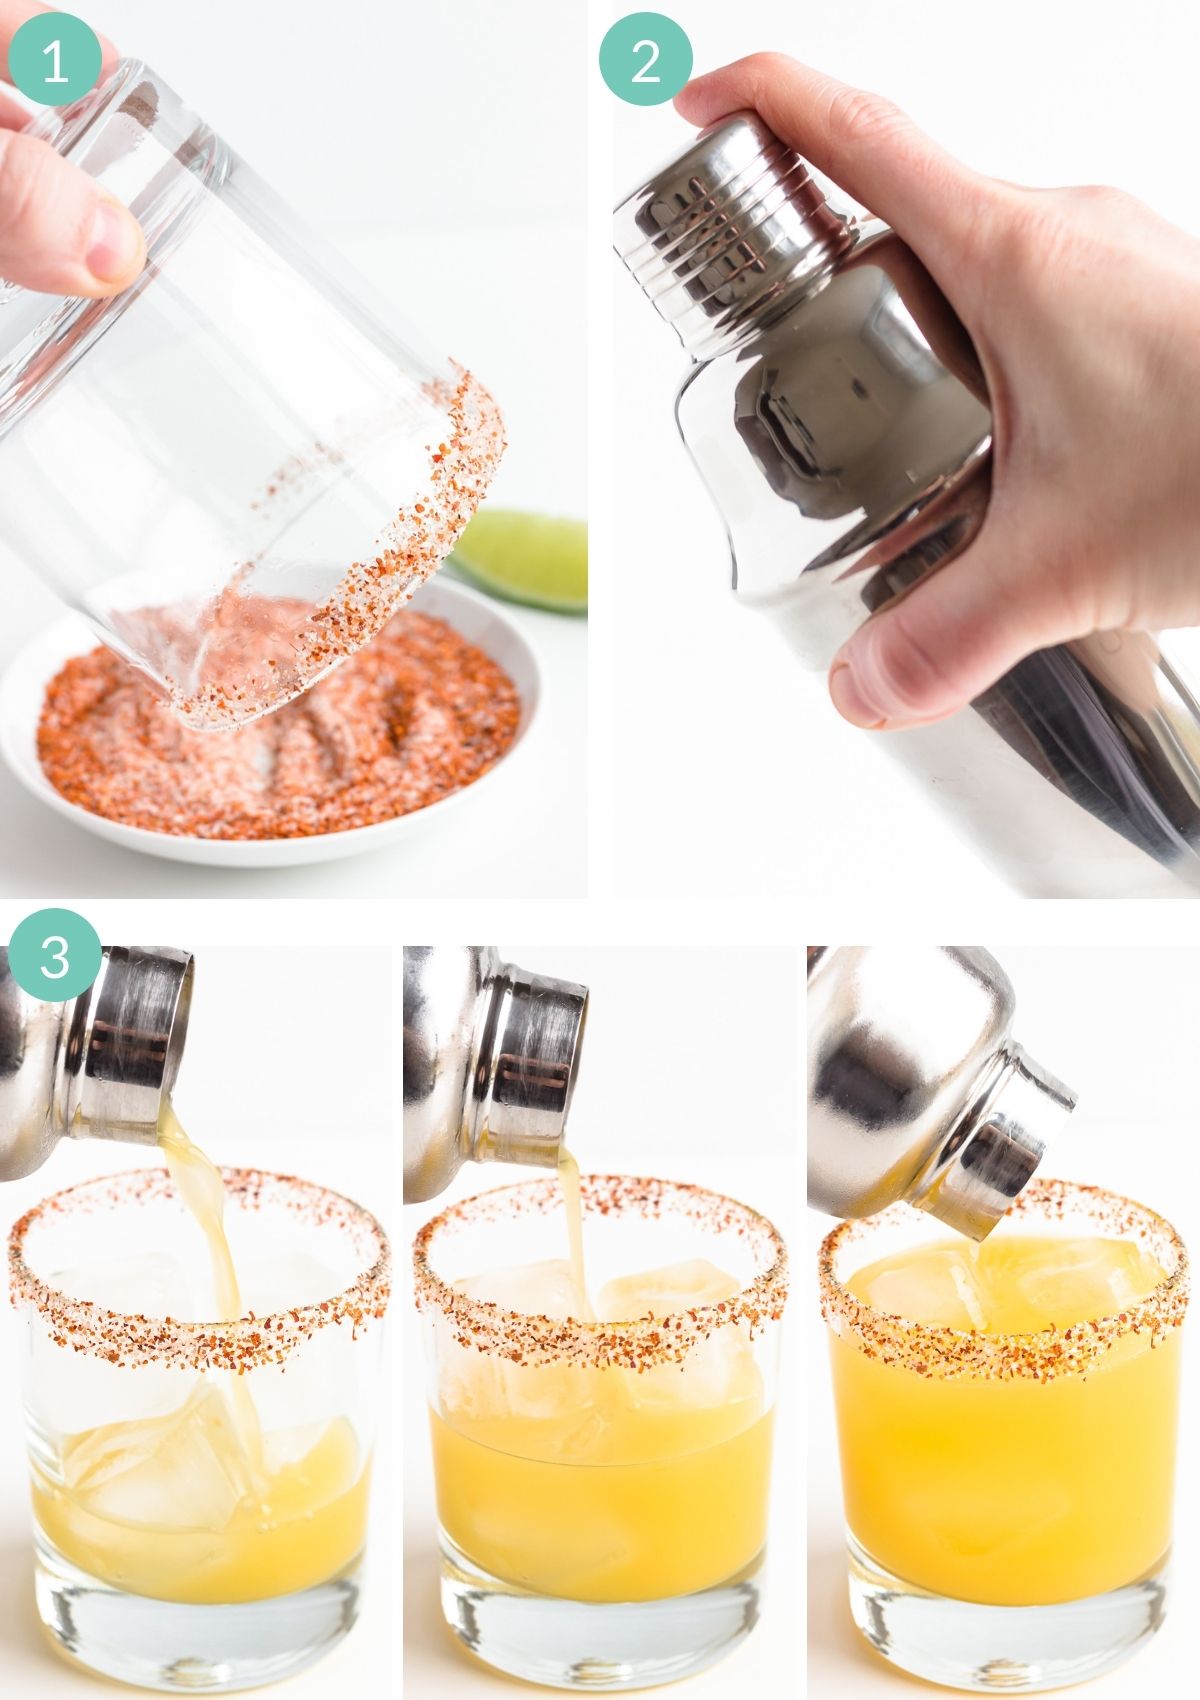 Numbered collage graphic showing how to make passion fruit margaritas step-by-step.